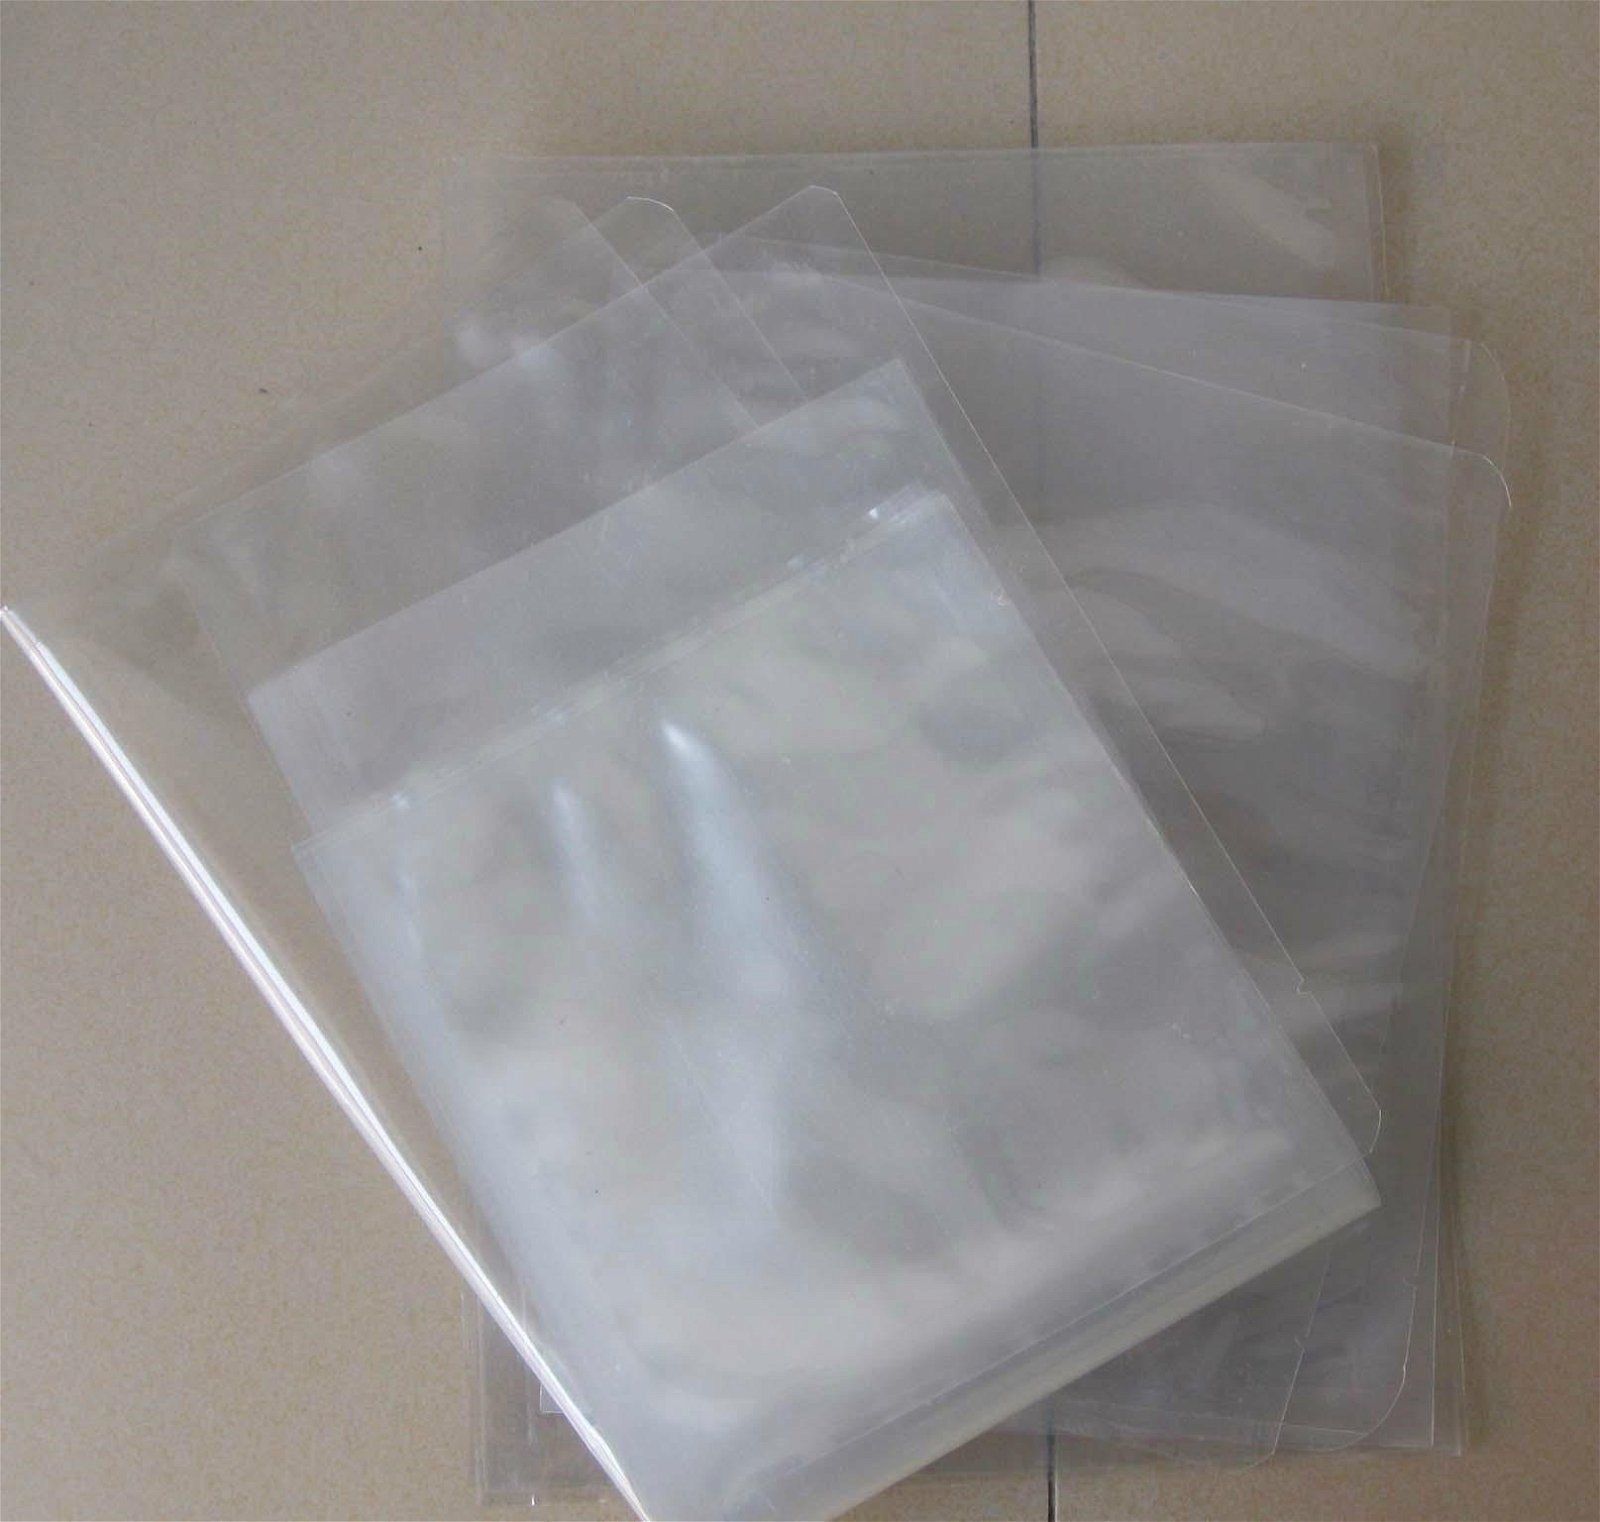 Antistatic Bag for Electronic Items 5